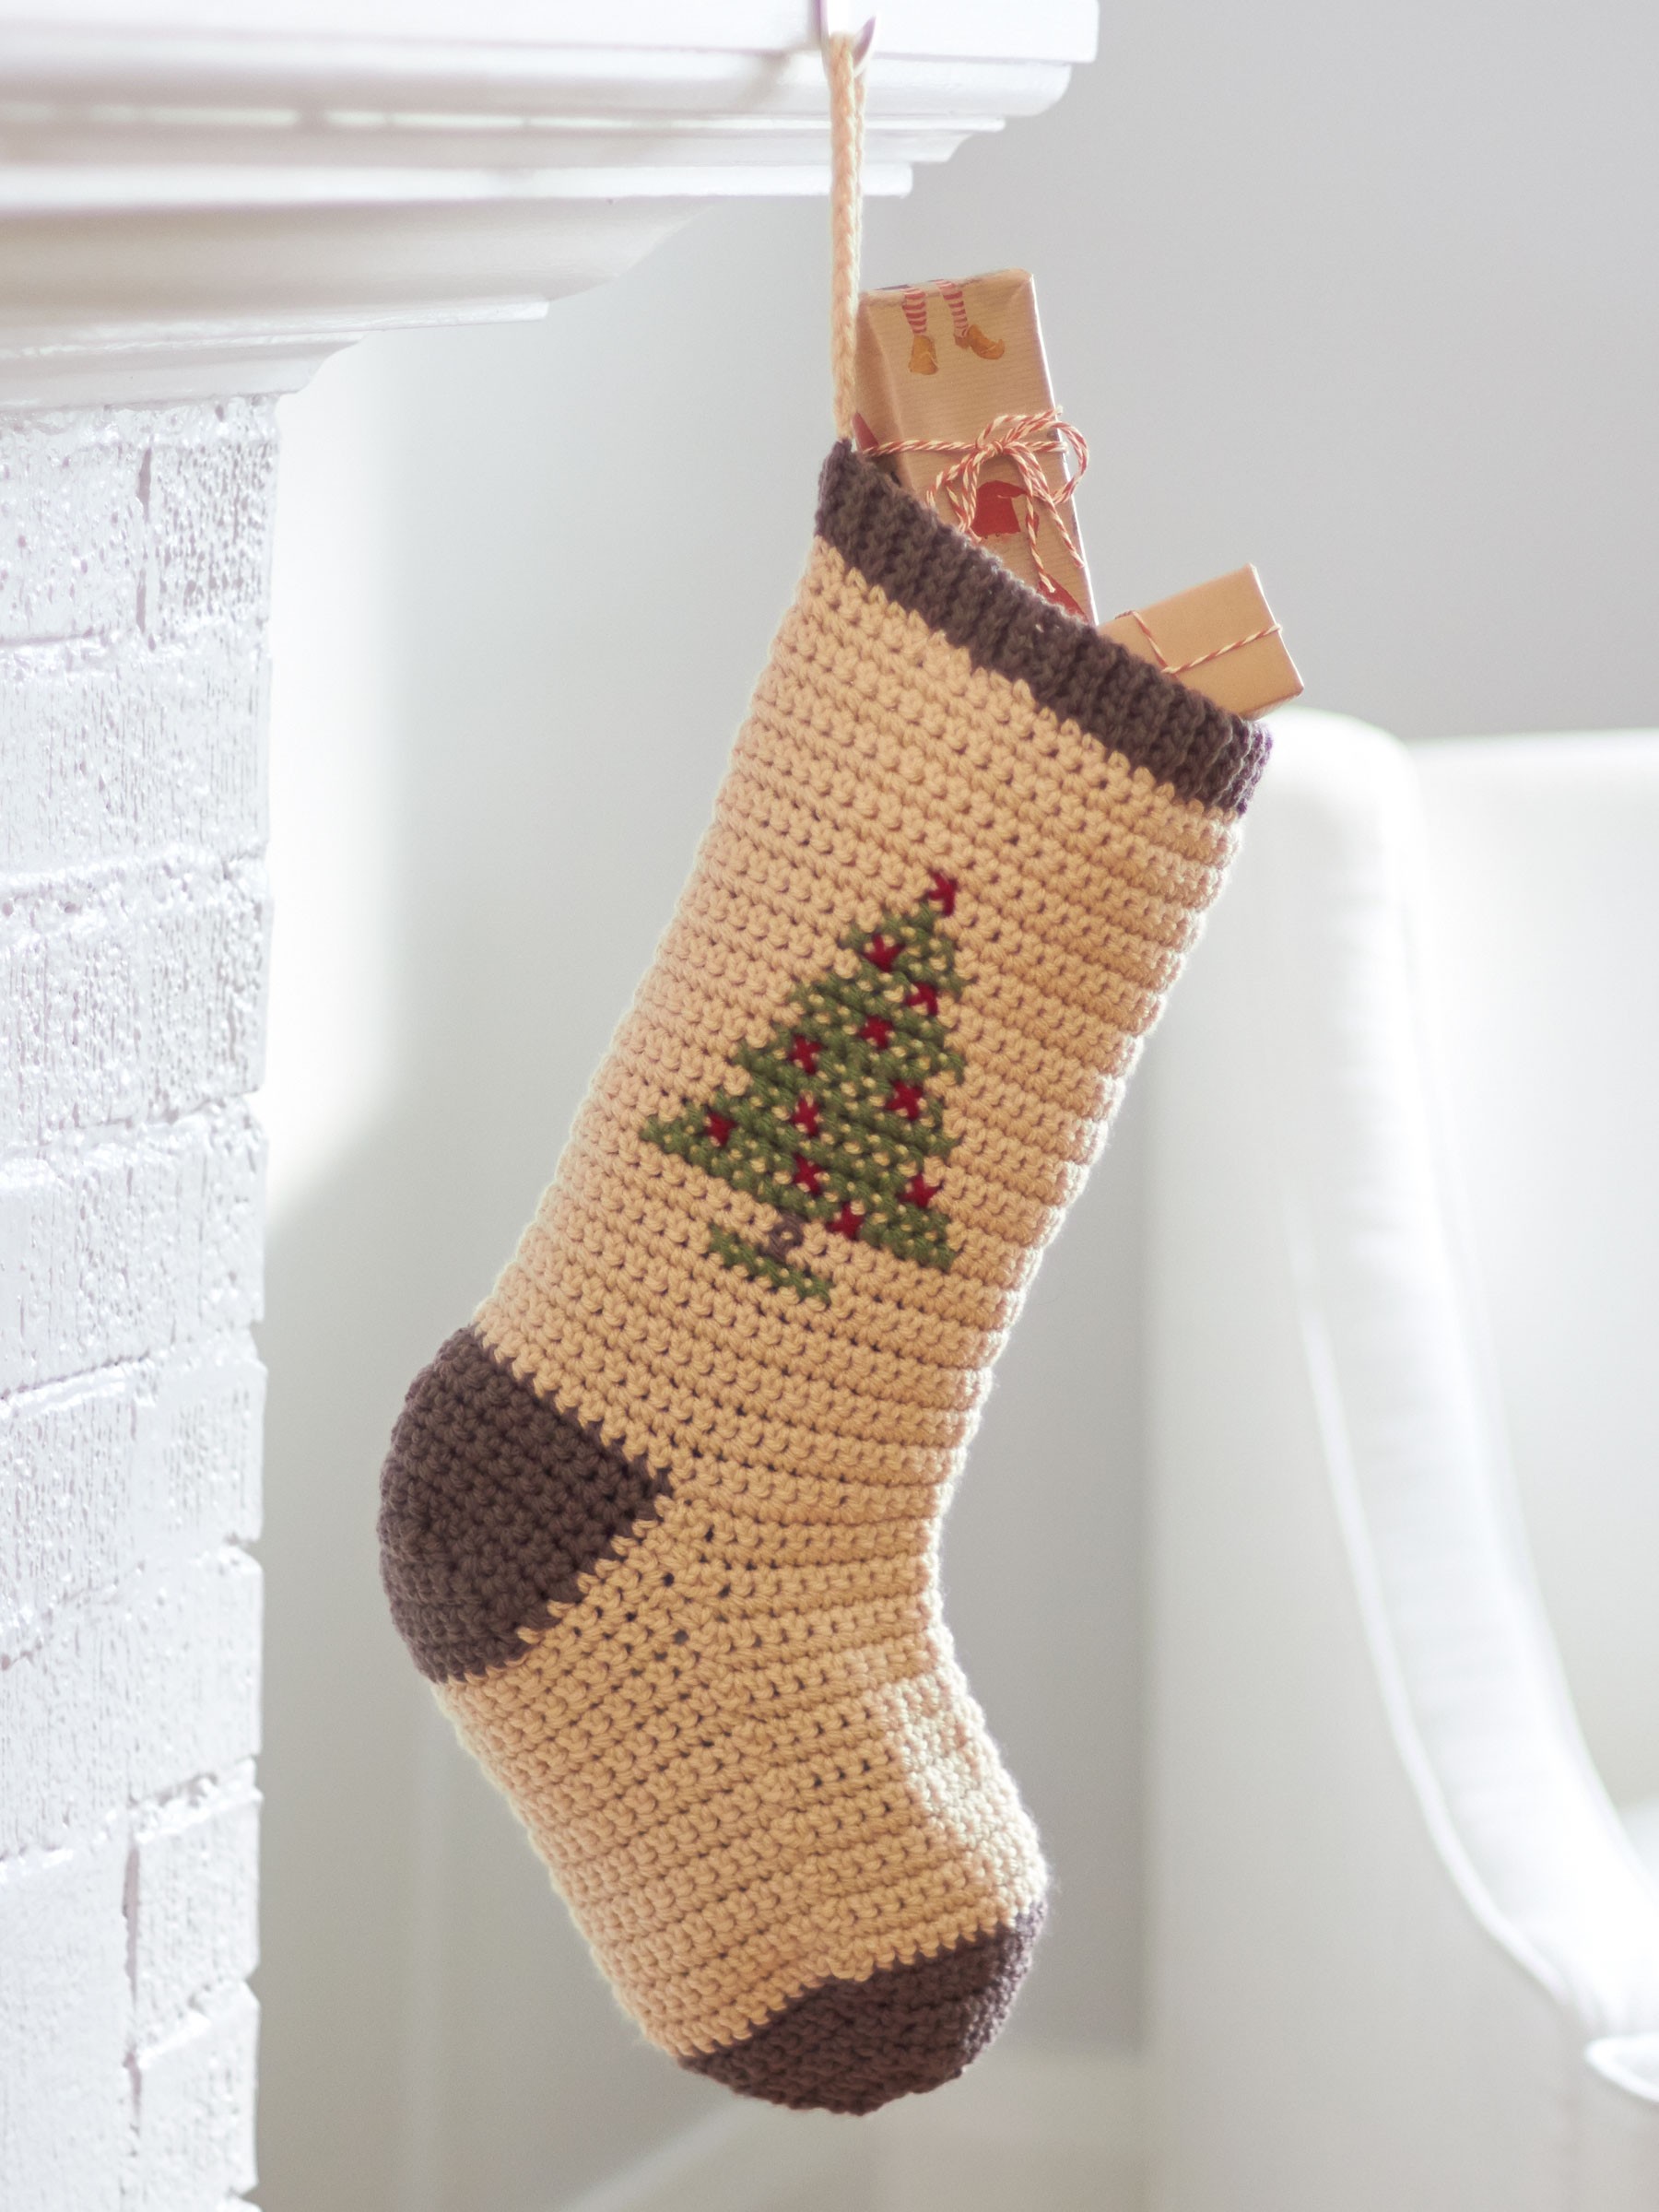 Crochet Christmas stockings Decorate with Crochet